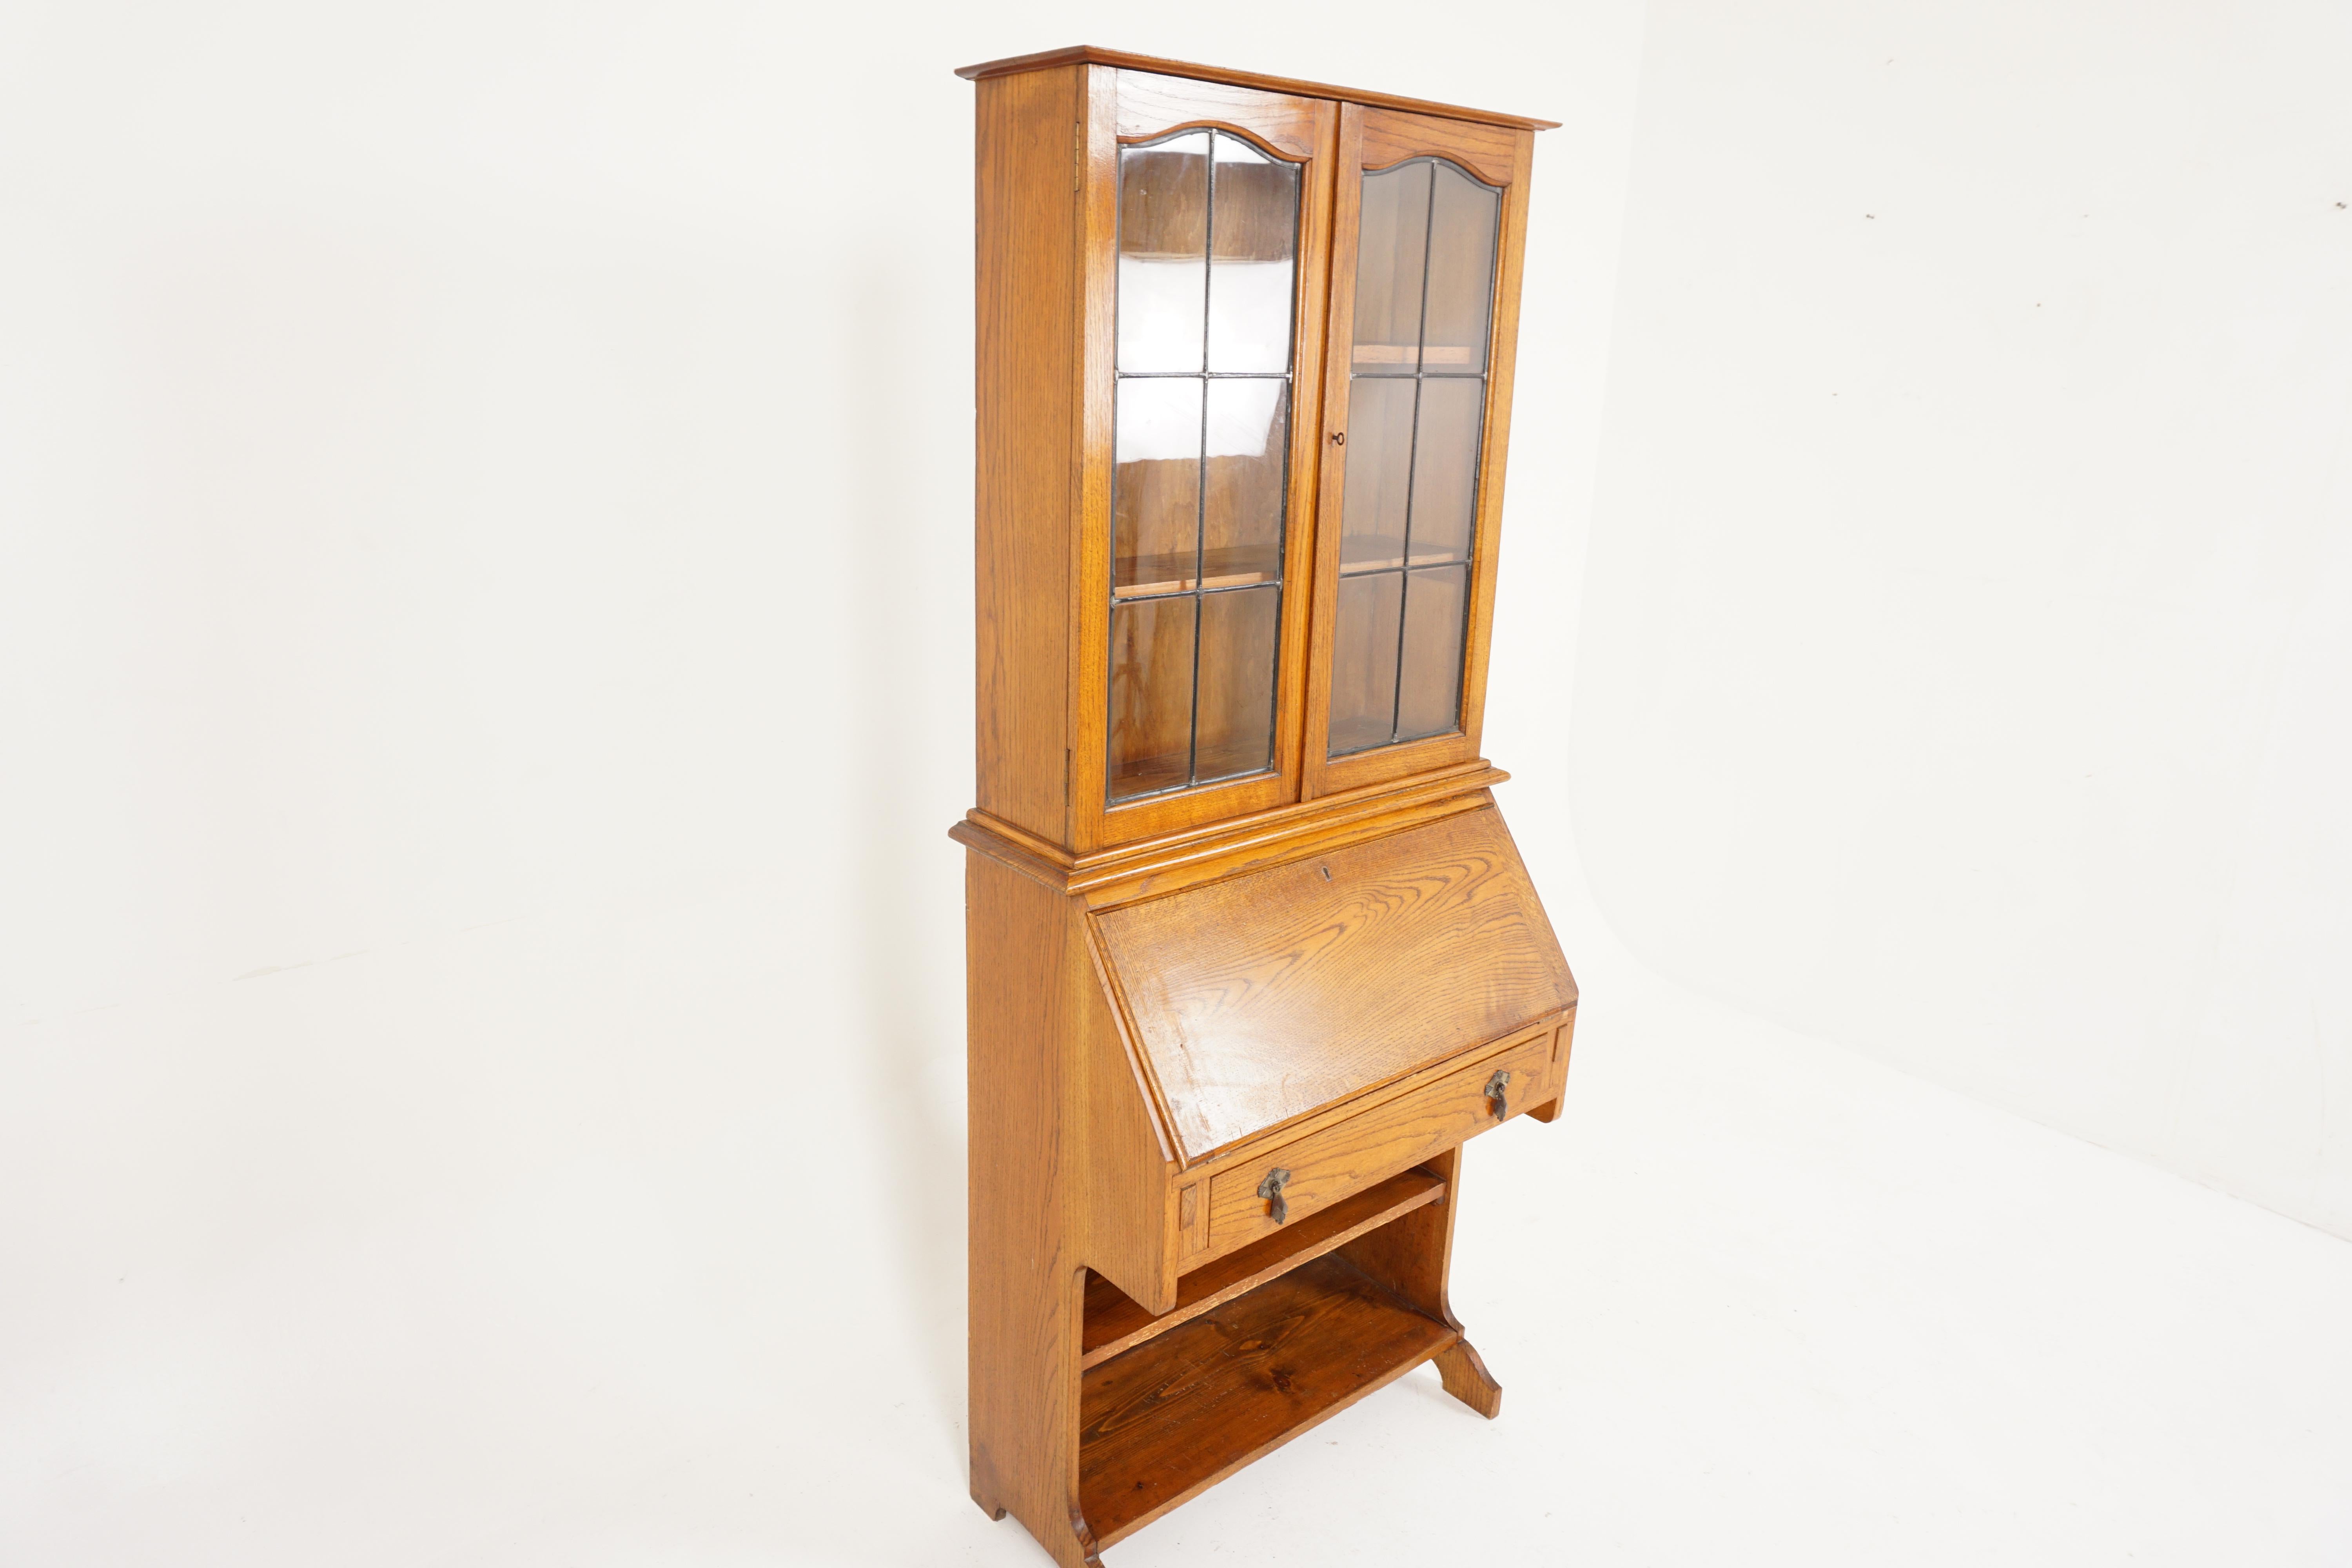 Antique Bureau bookcase, Slant front desk, bookcase top, Scotland 1910, H244

Scotland 1910
Solid oak
Original finish
The top with glass doors and stitched interior
The fall front opening to reveal interior fitted with cubby holes and drawers
Single